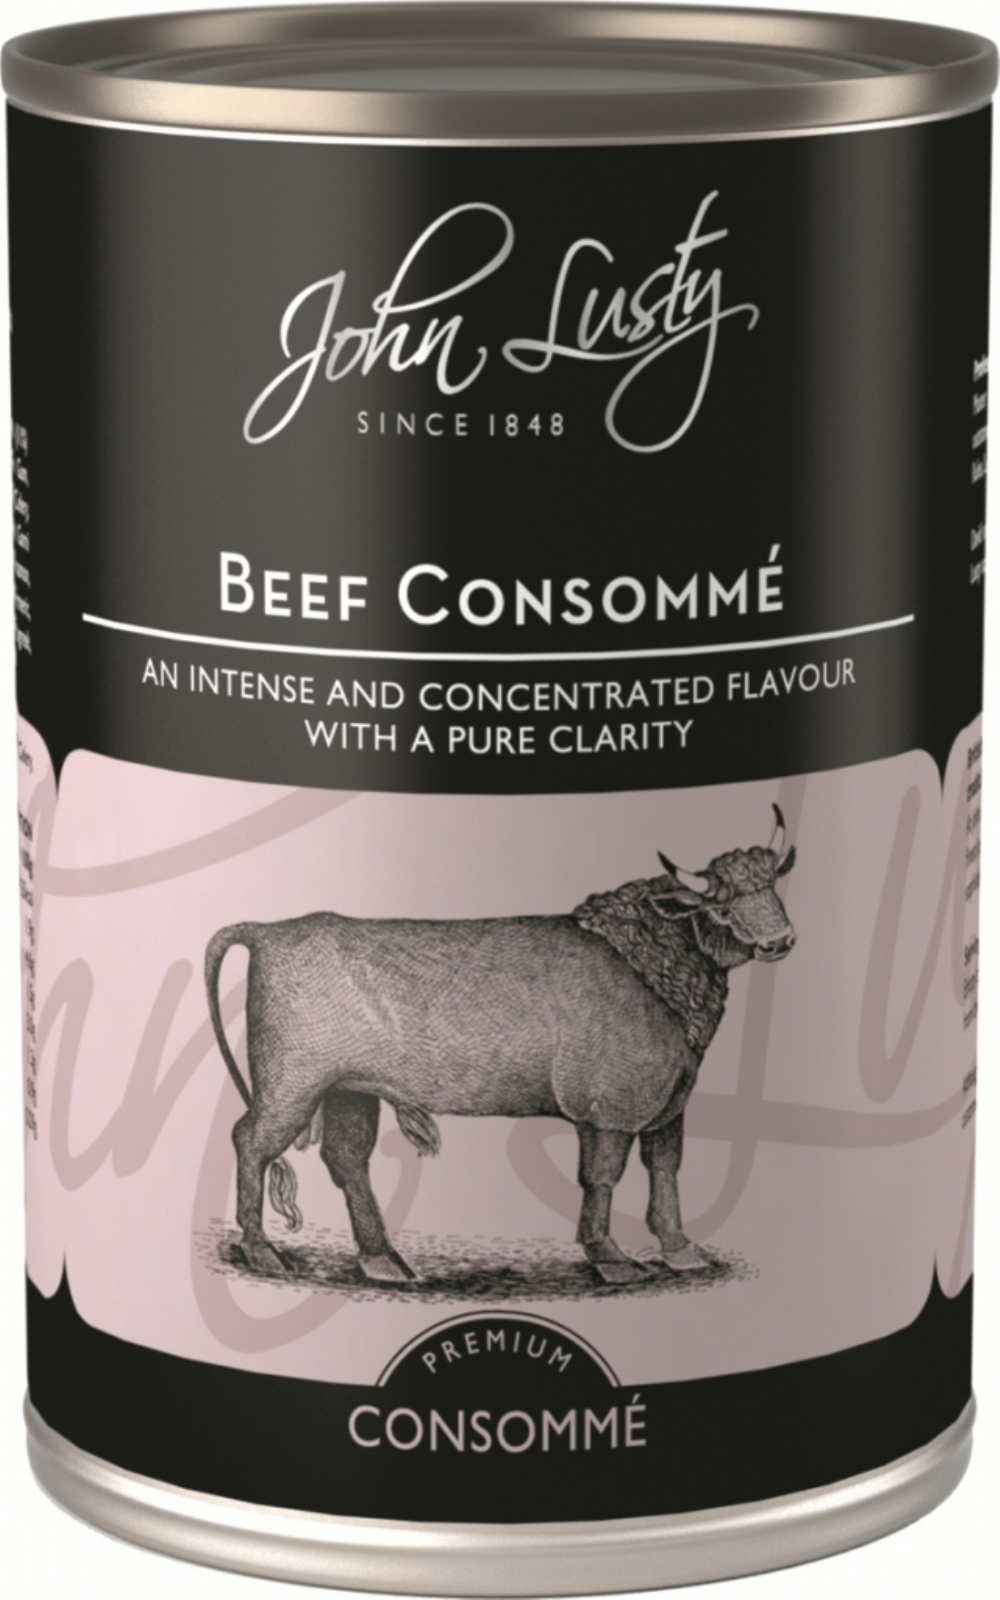 JOHN LUSTY Beef Consomme 392g